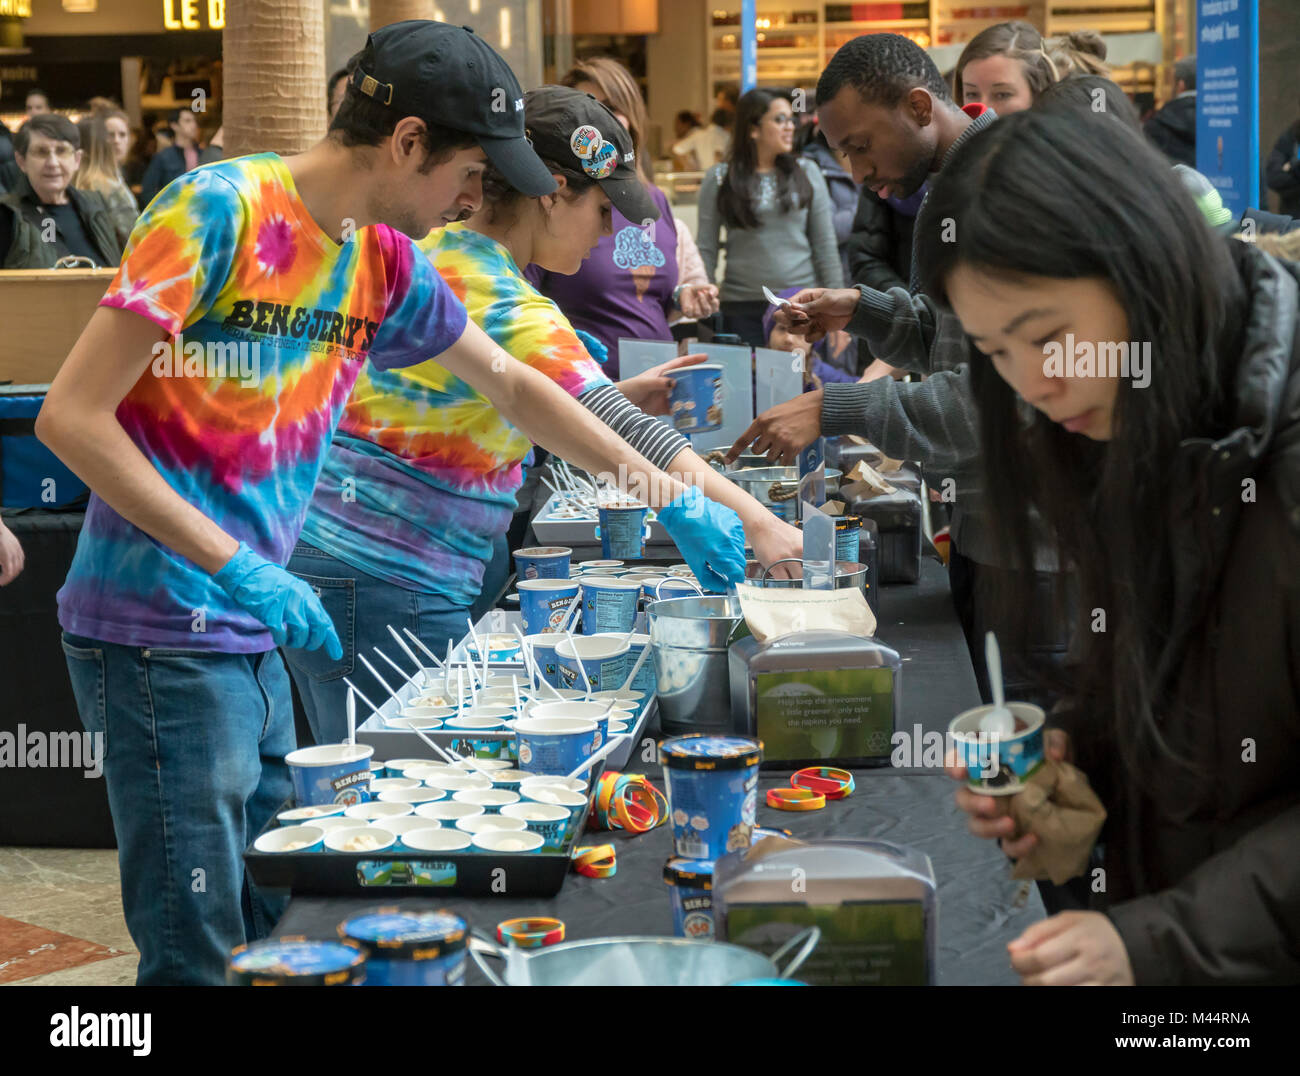 Thousands of ice cream lovers invade the Brookfield Place Winter Garden for Ben & Jerry's New Creations Launch Party in New York on Wednesday, February 7, 2018. The branding event introduces a new product line for Unilever's Ben & Jerry's with only 140-160 calories per serving. Called Moo-phoria, the light ice cream line comes in three flavors, 'Chocolate Milk & Cookies', Caramel Cookie Fix', and 'P.B. Dough', organic and made with non-GMO ingredients. The product line is a response to the popular Halo Top which gaining market share. (© Richard B. Levine) Stock Photo